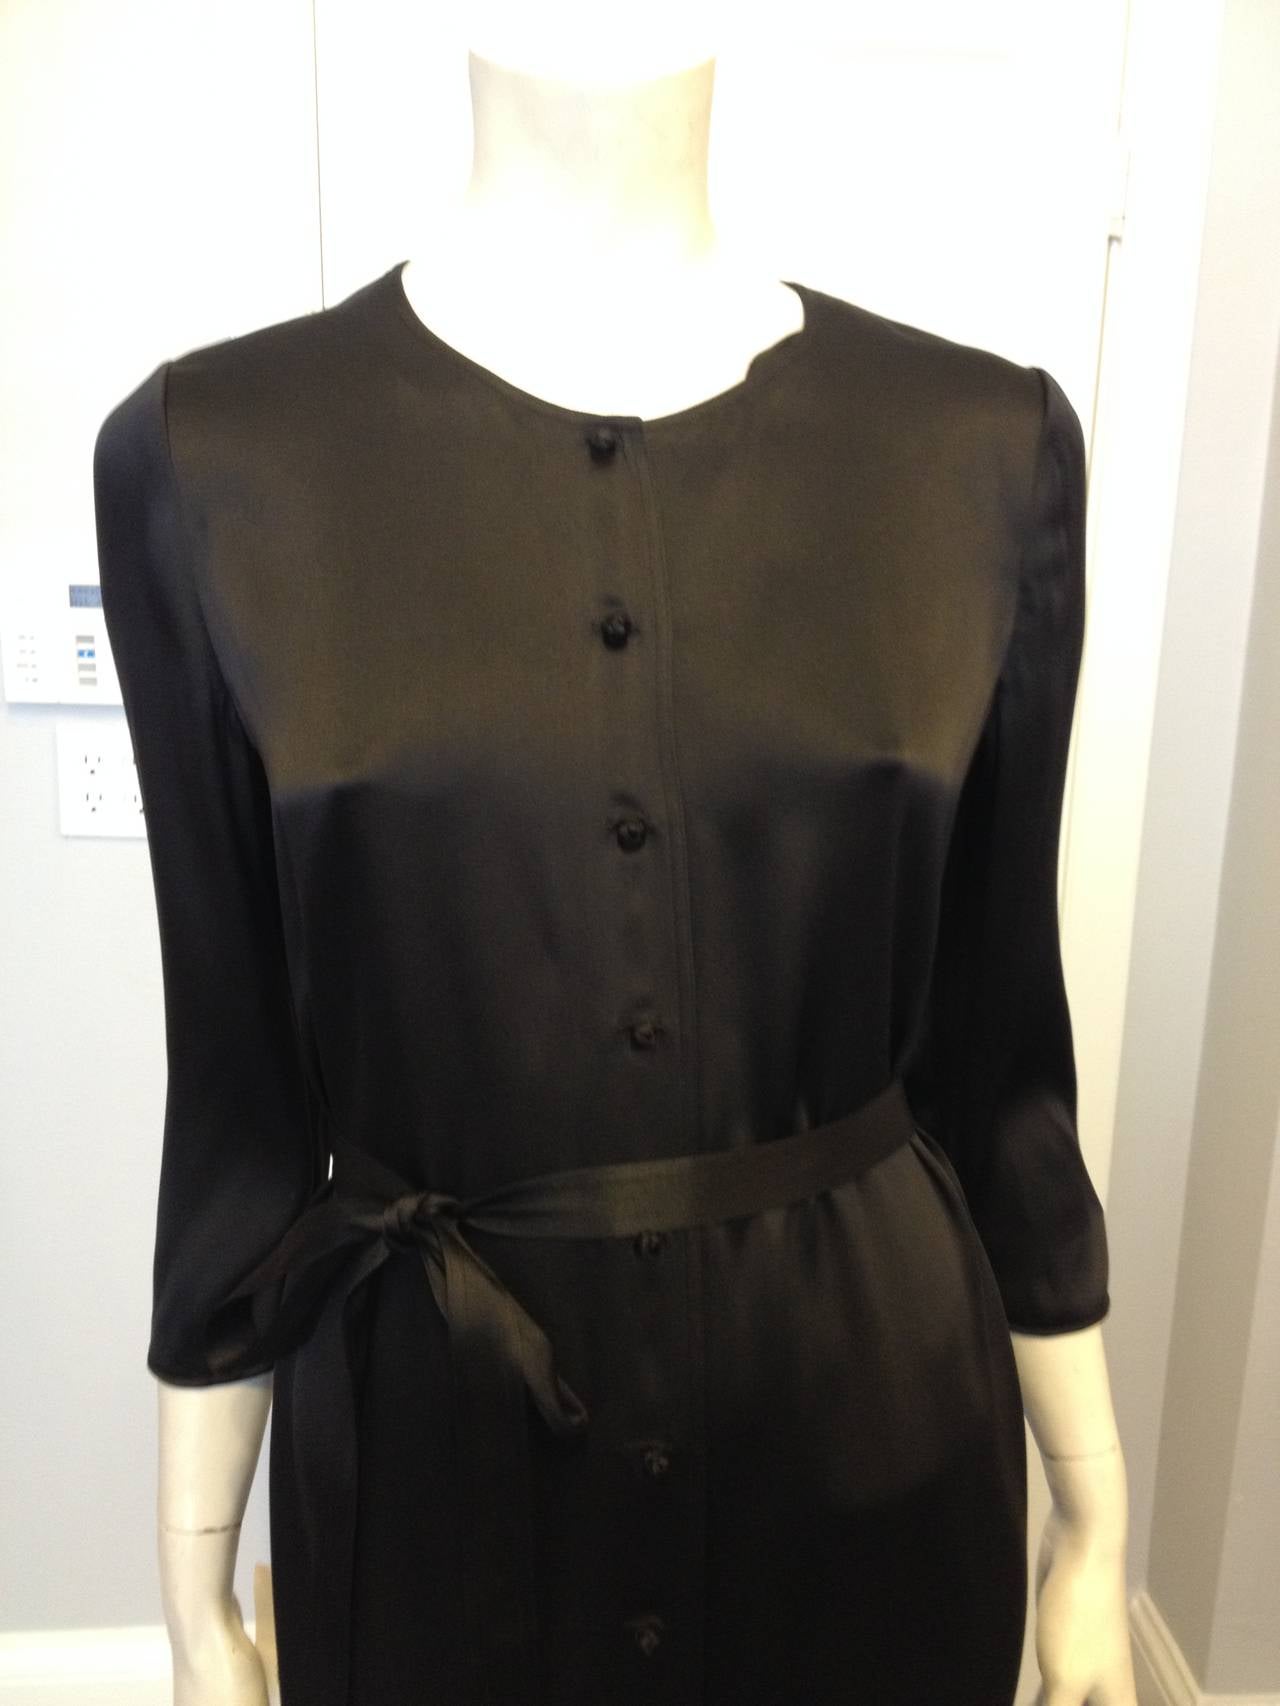 Ralph Rucci draws much inspiration from Japan - the line is named Chado after the tea ceremony, and his designs are austere and spare in line with Japanese traditional aesthetics. This piece is stunning in its simplicity - in deep black satin with